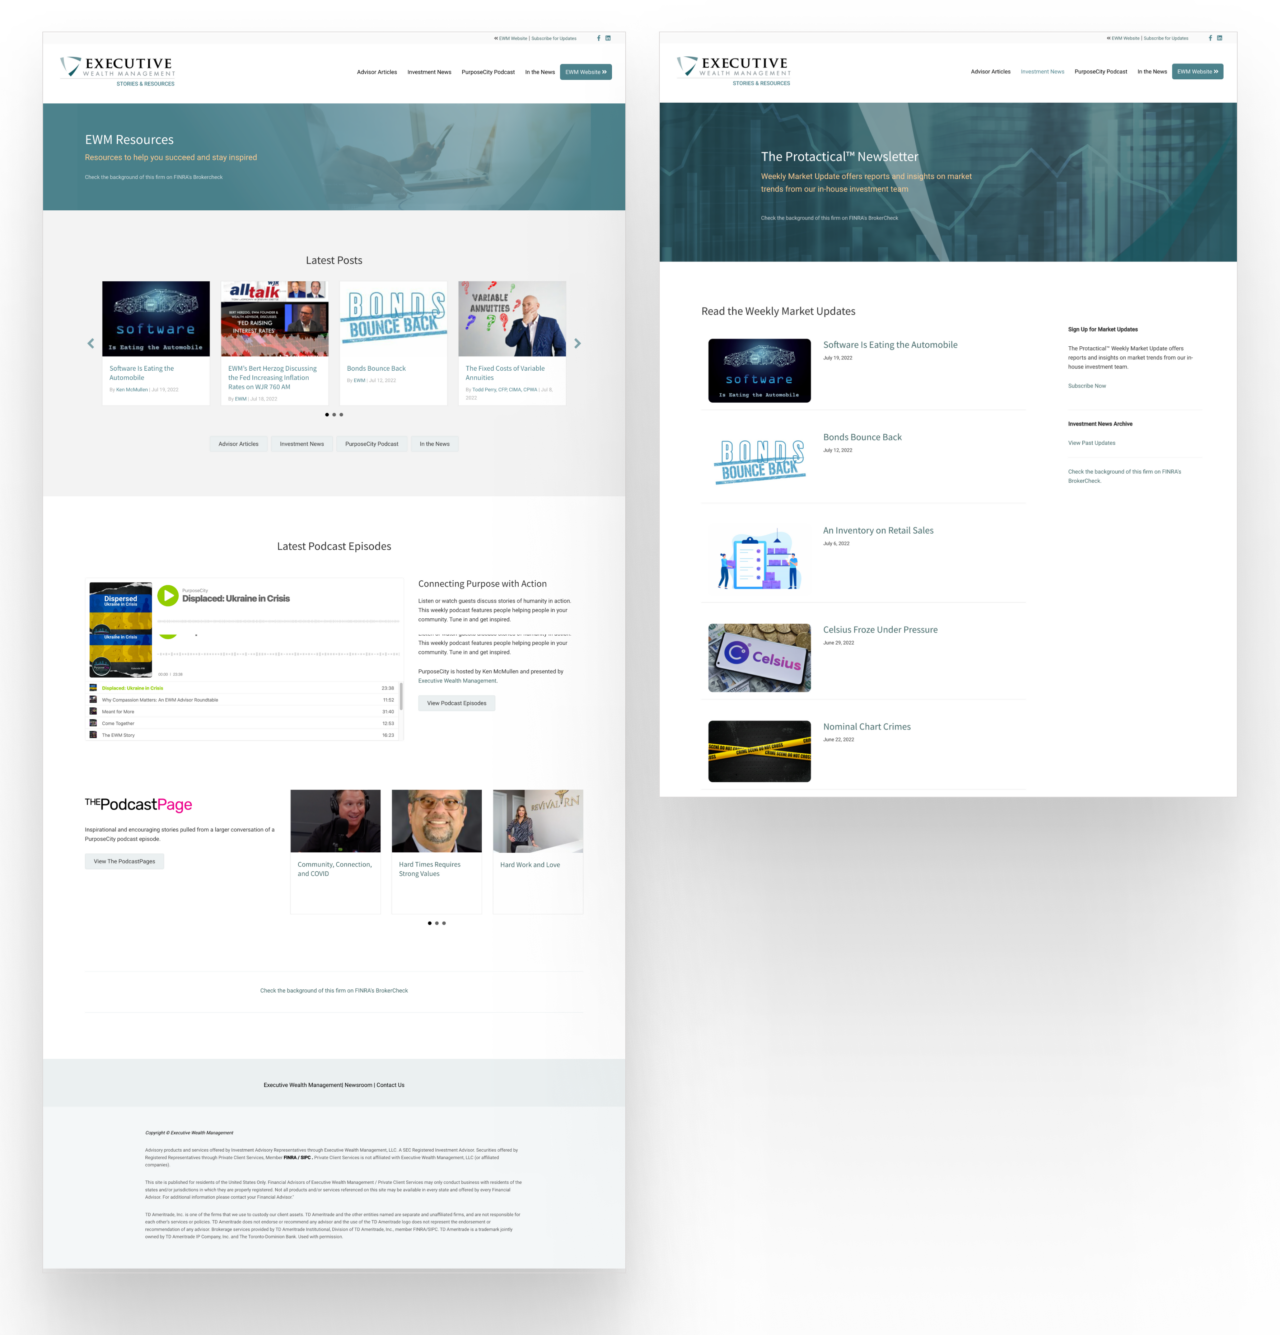 Executive Wealth Management Resources website layout